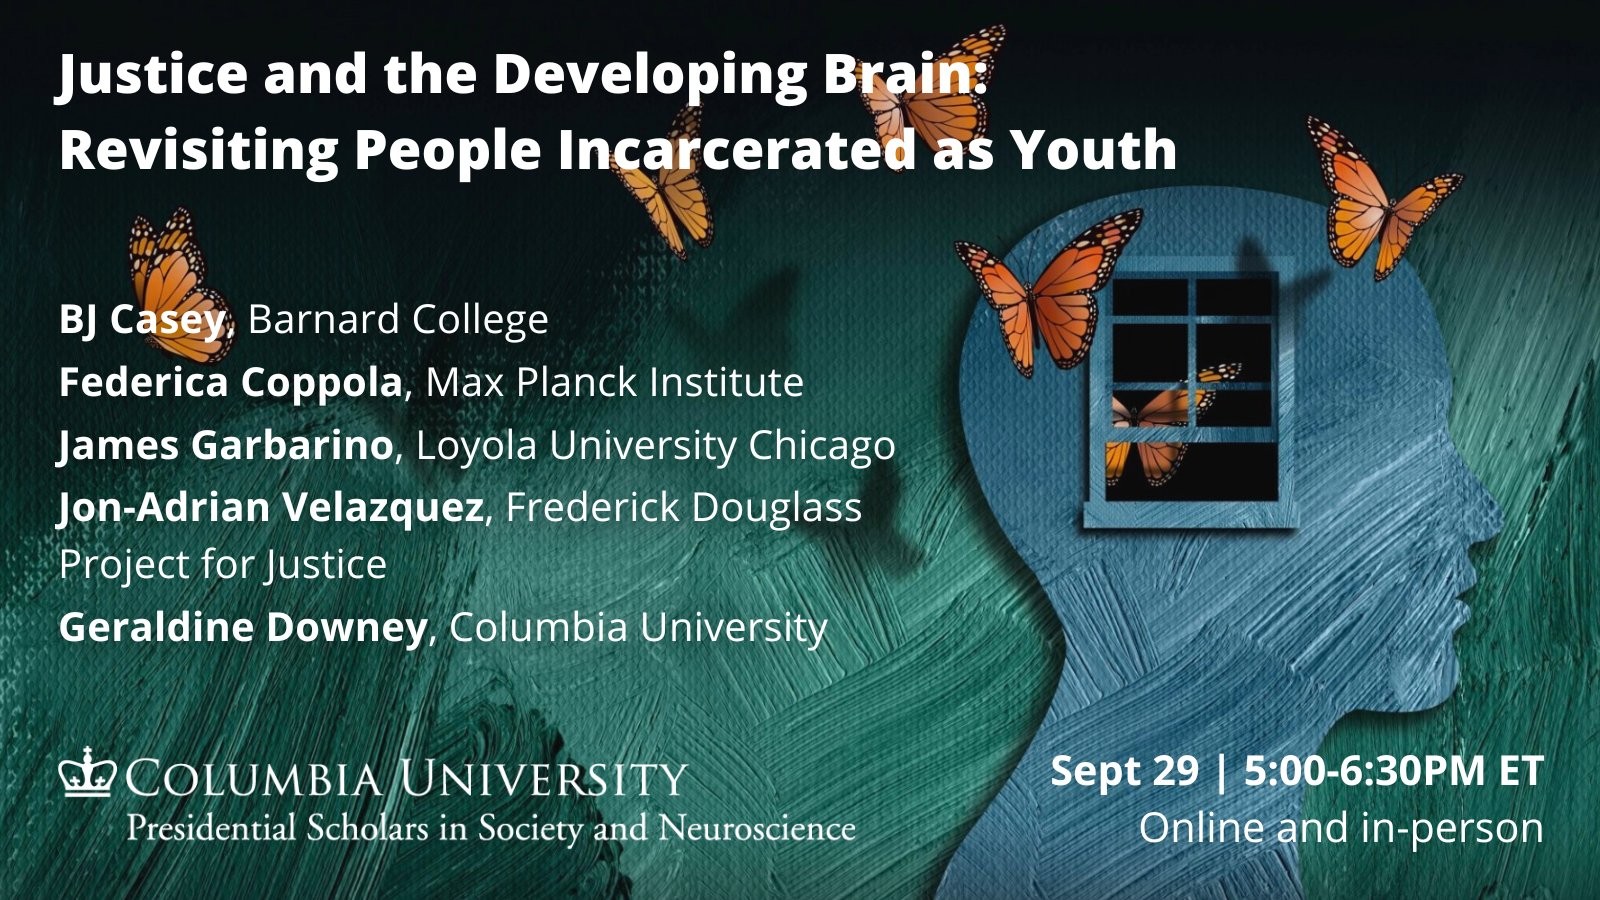 Justice and the Developing Brain: Revisiting People Incarcerated as Youth